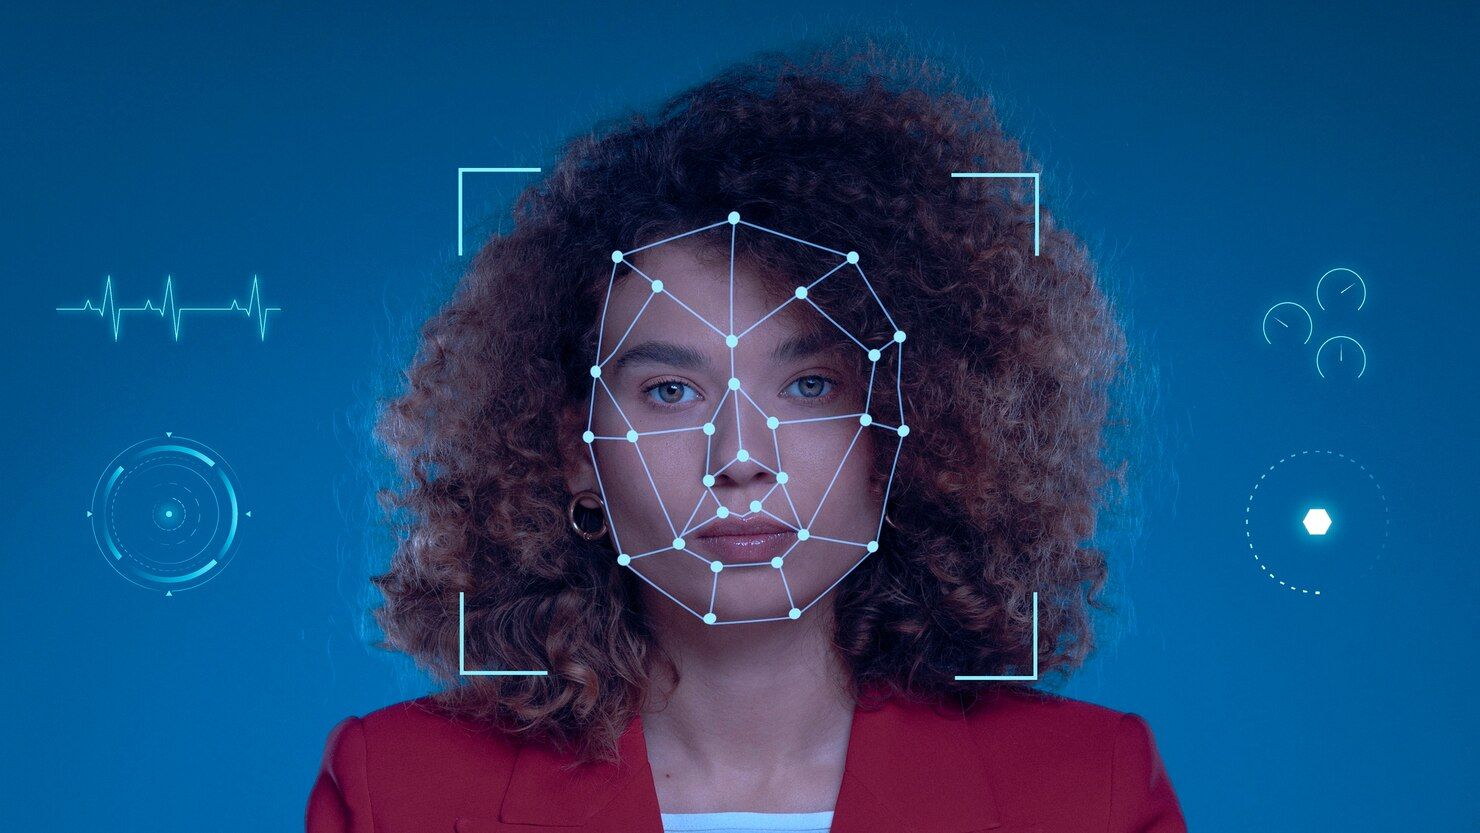 A woman's face with a digital facial recognition mesh overlay, surrounded by various technology-related icons on a blue background.